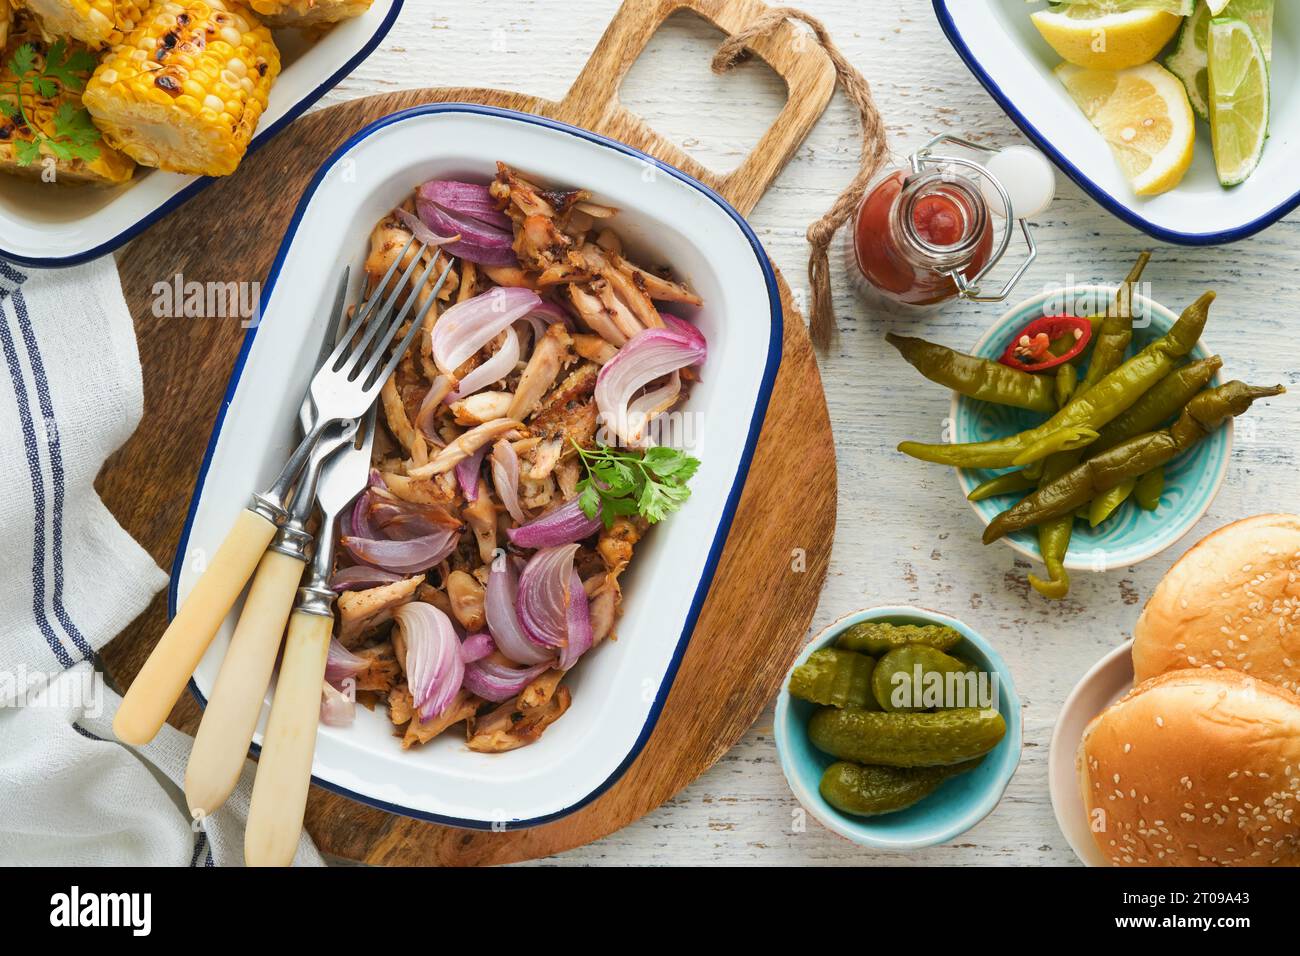 Pulled bbq chicken with baked onions on serving platter, bbq corn, pickles, chili peppers and buns for hot dogs and burgers, tomato sauce. Traditional Stock Photo